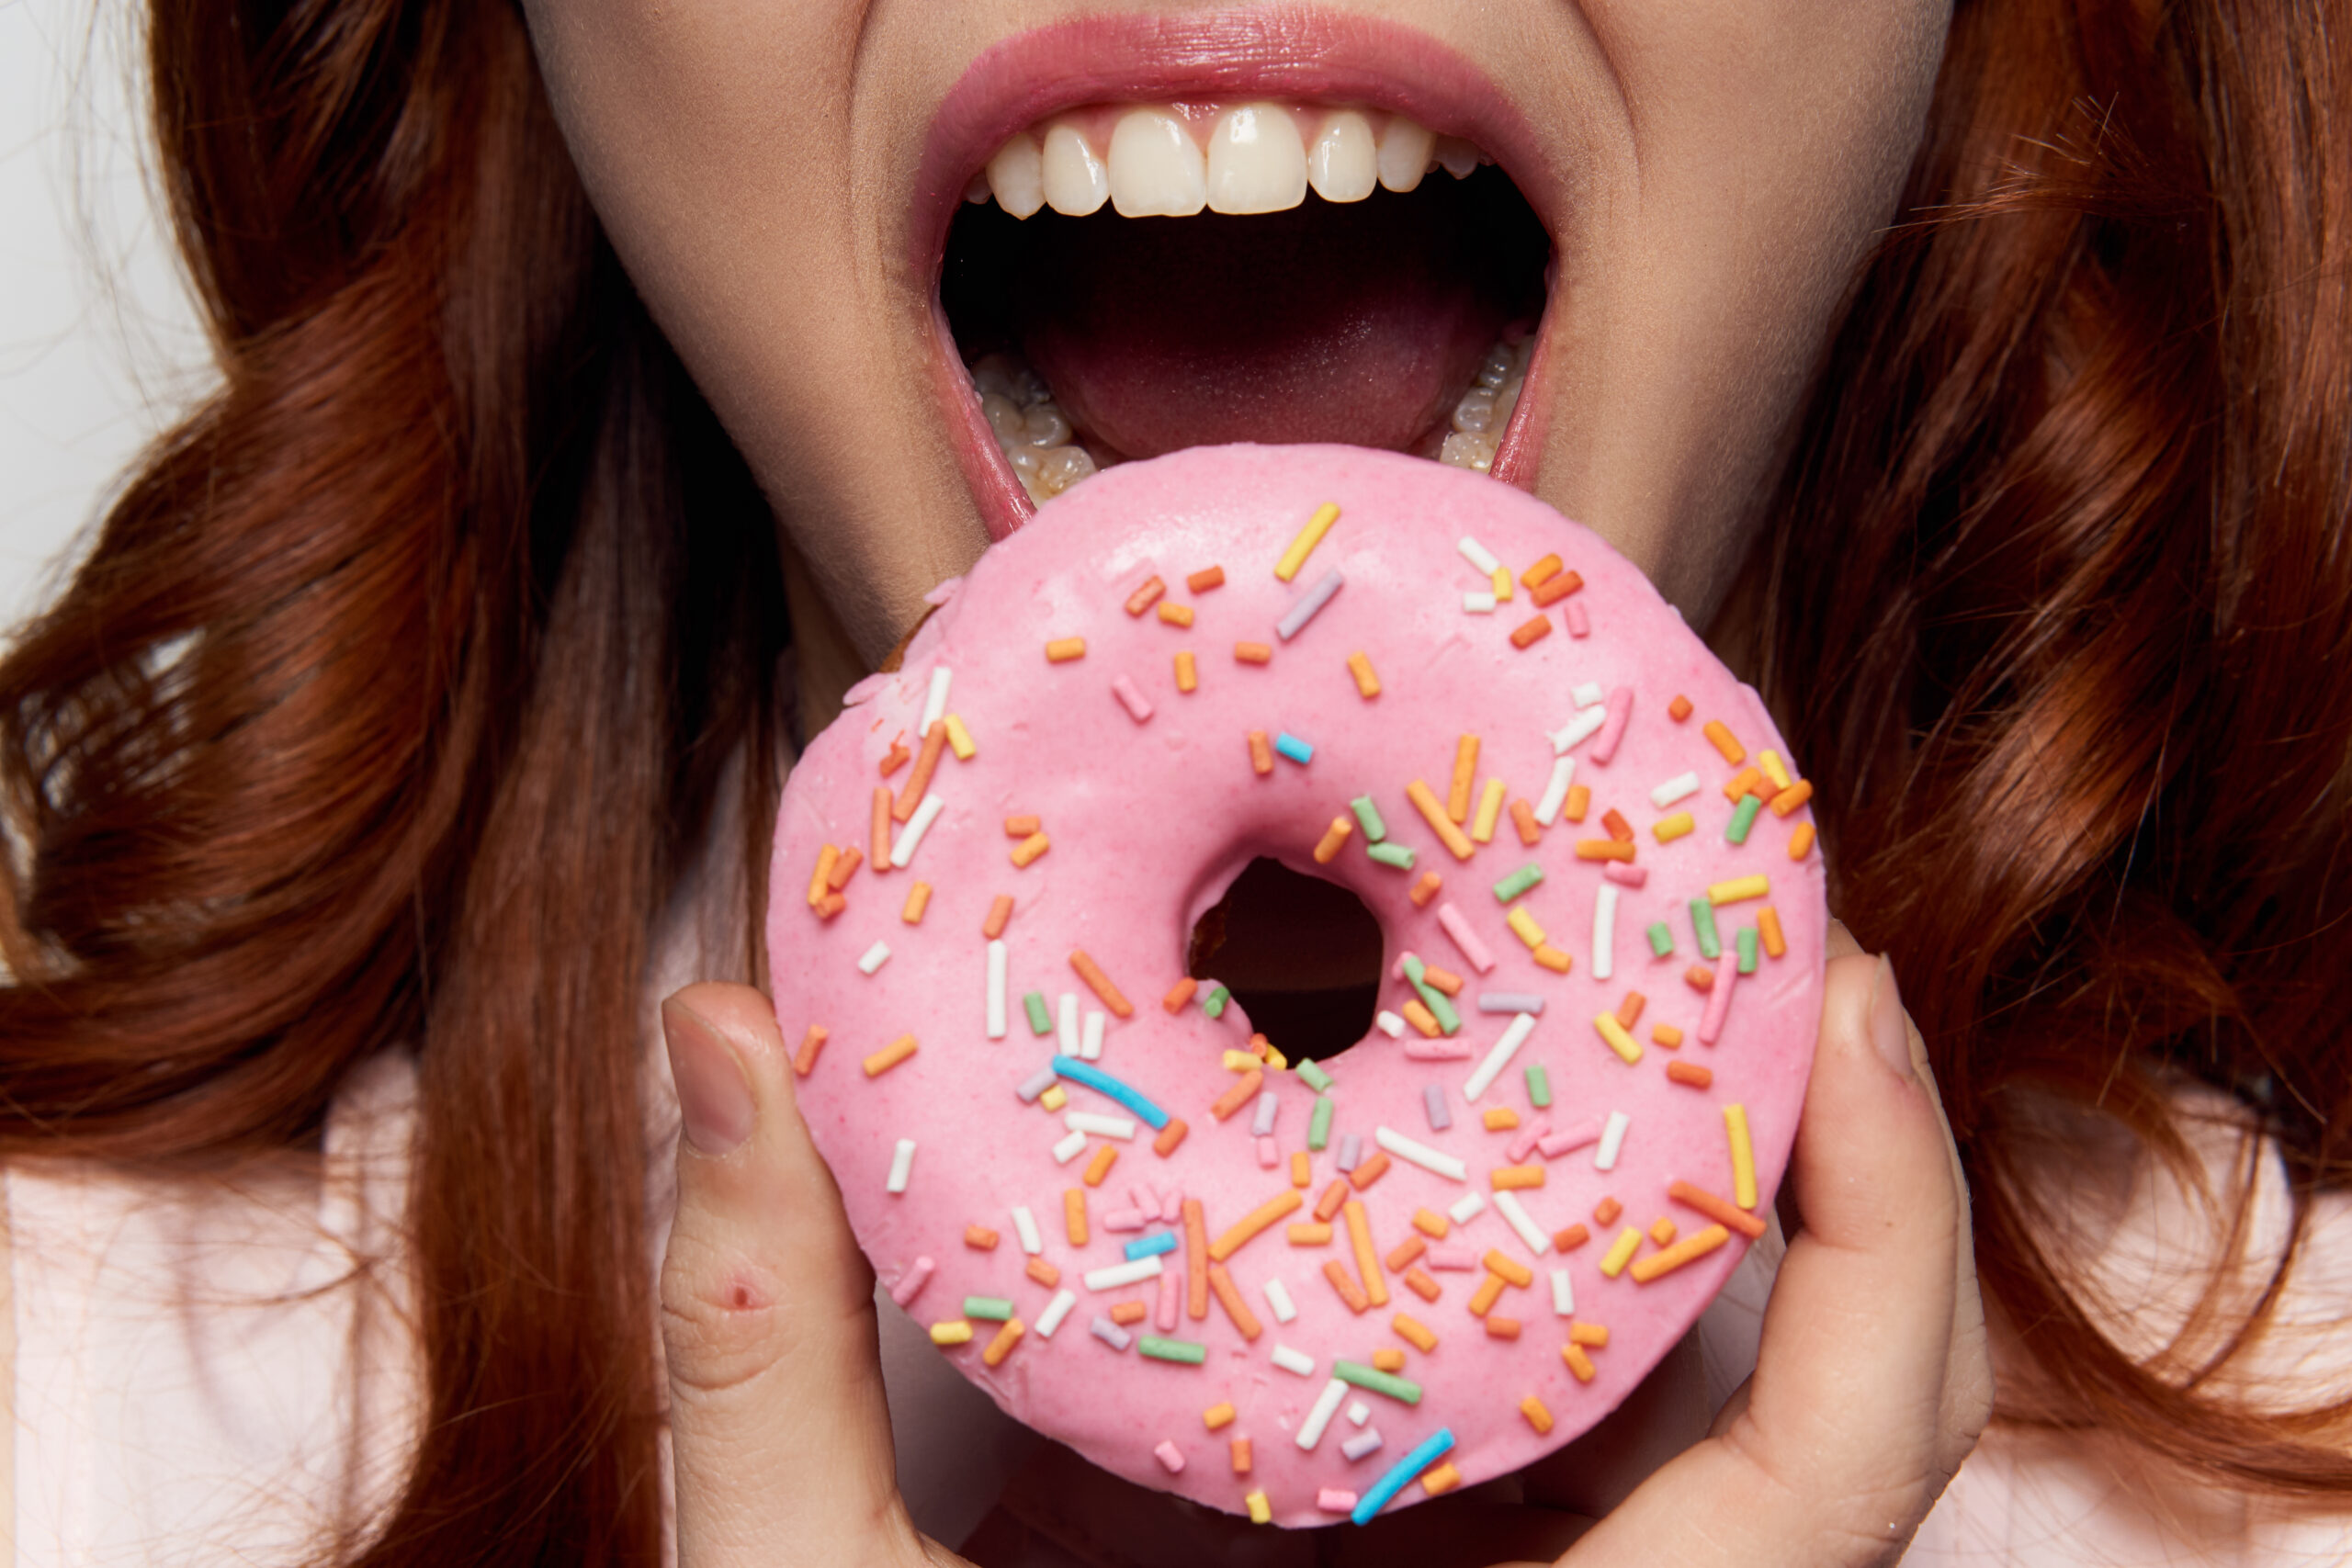 What Impact Does Your Sweet Tooth Have On Your Oral Health